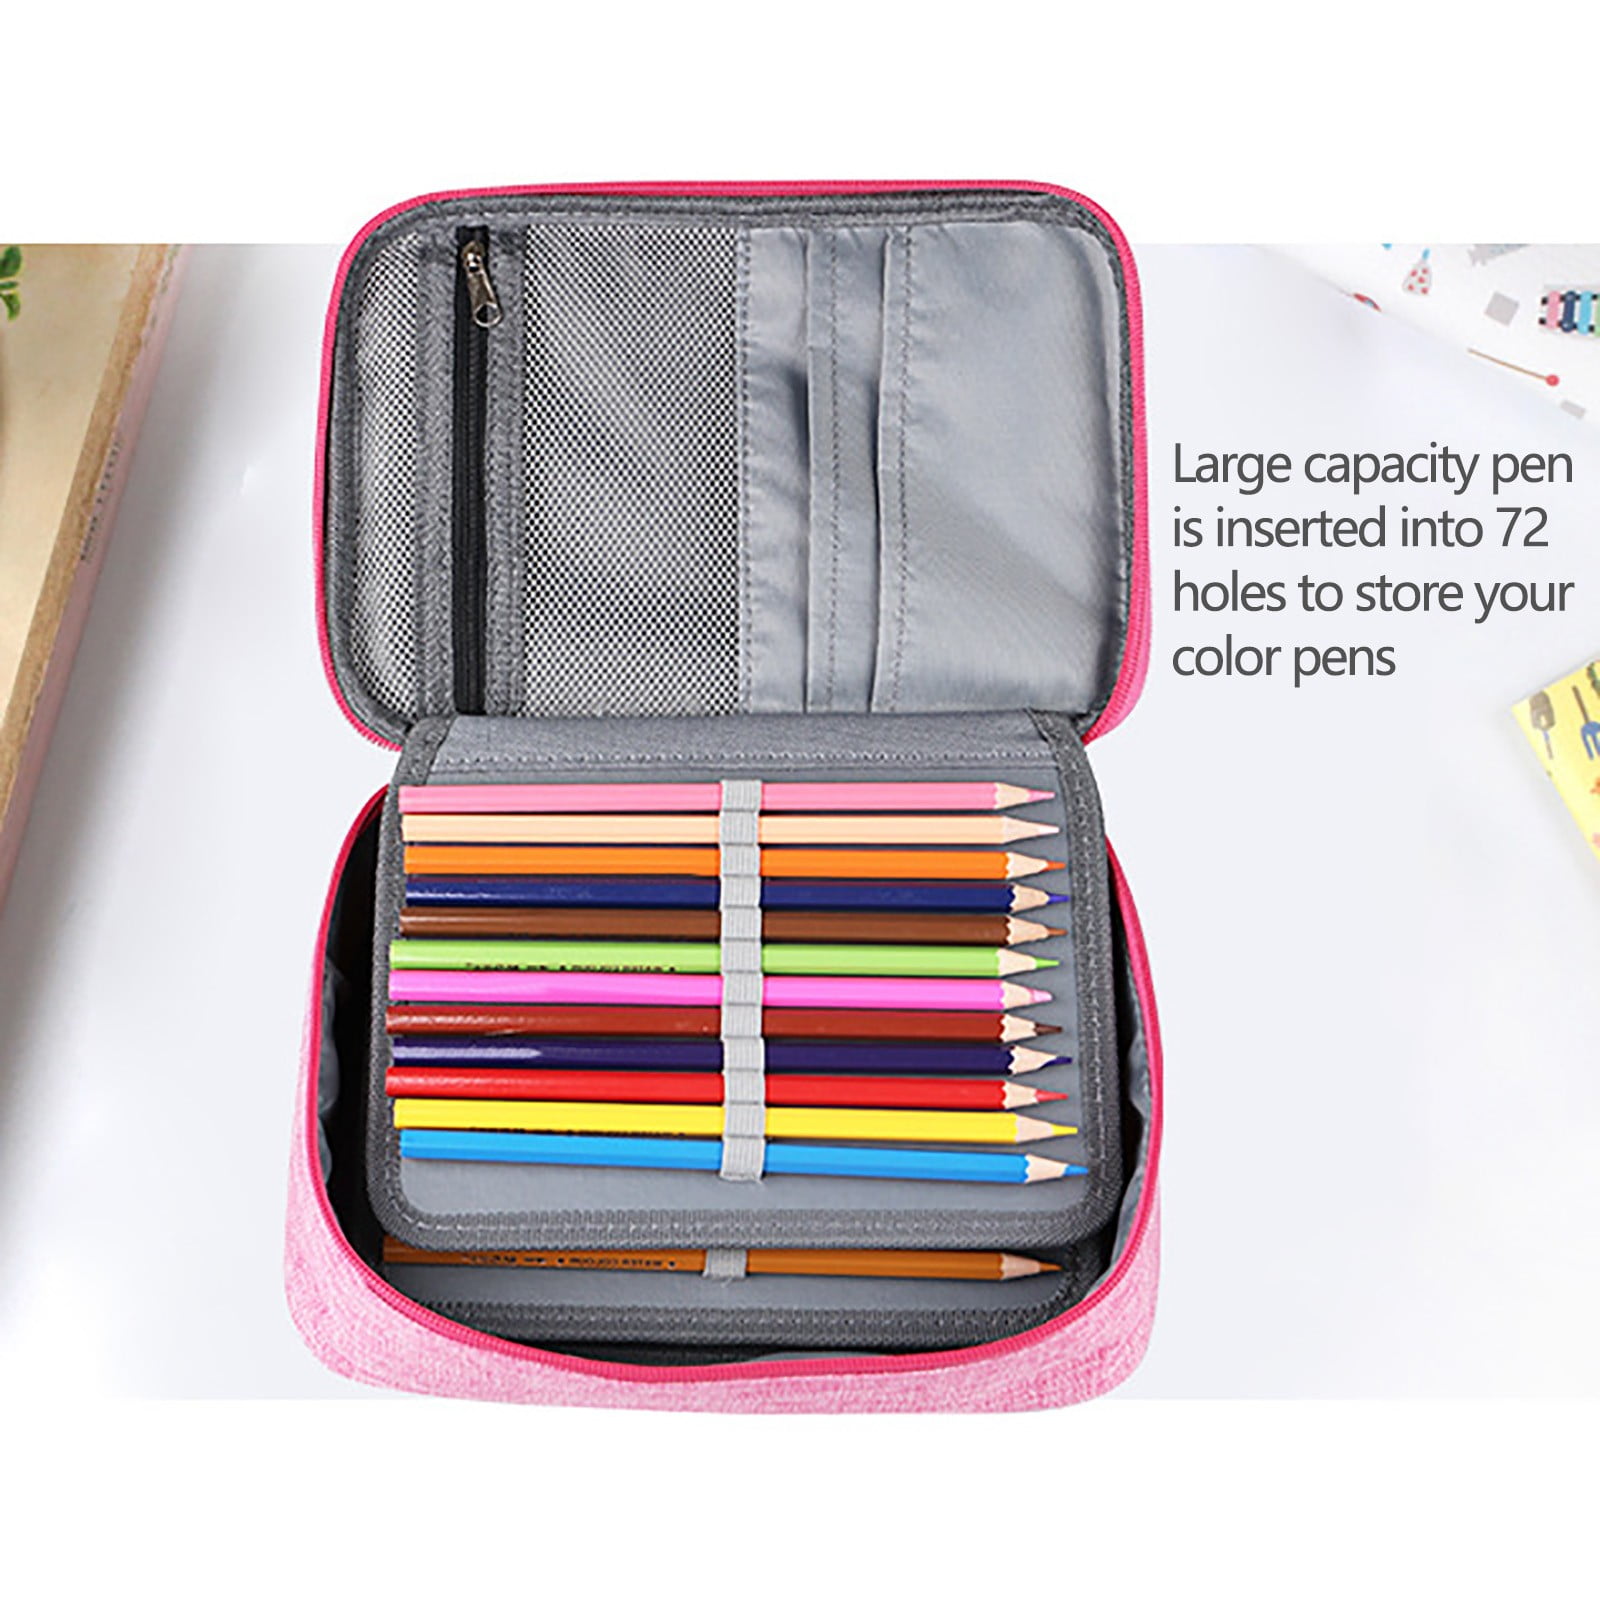 YOUSHARES 192 Slots Colored Pencil Case, Large Capacity Pencil Holder Pen Organizer Bag with Zipper for Prismacolor Watercolor Coloring Pencils, Gel